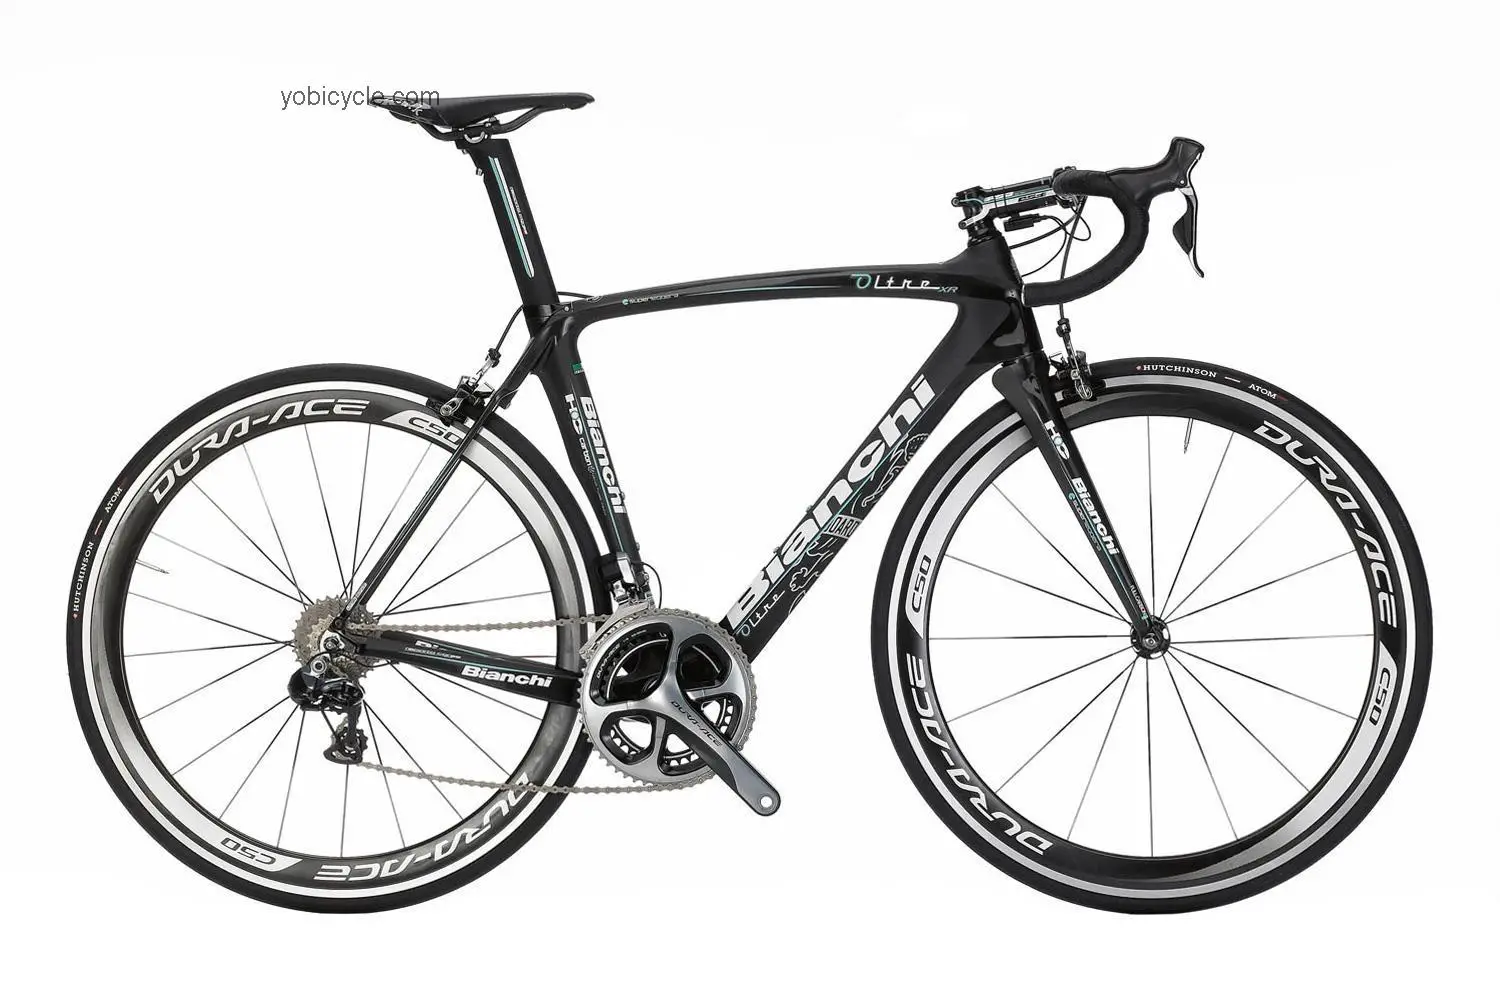 Bianchi Oltre XR Dura Ace Di2 competitors and comparison tool online specs and performance